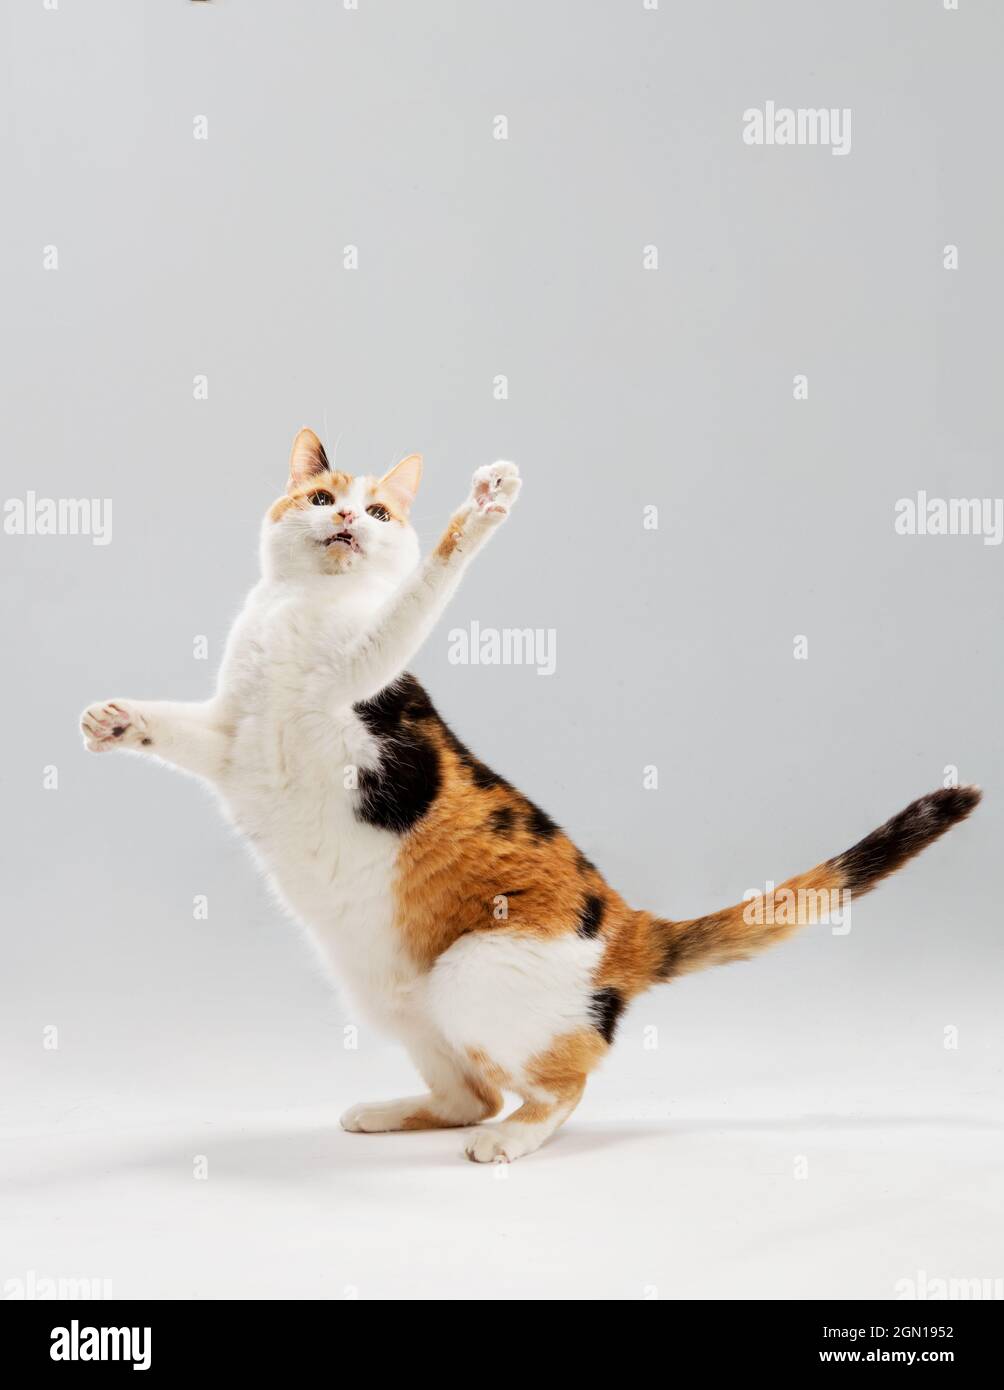 Calico cat standing on two legs in studio and extending a paw in the air. Stock Photo